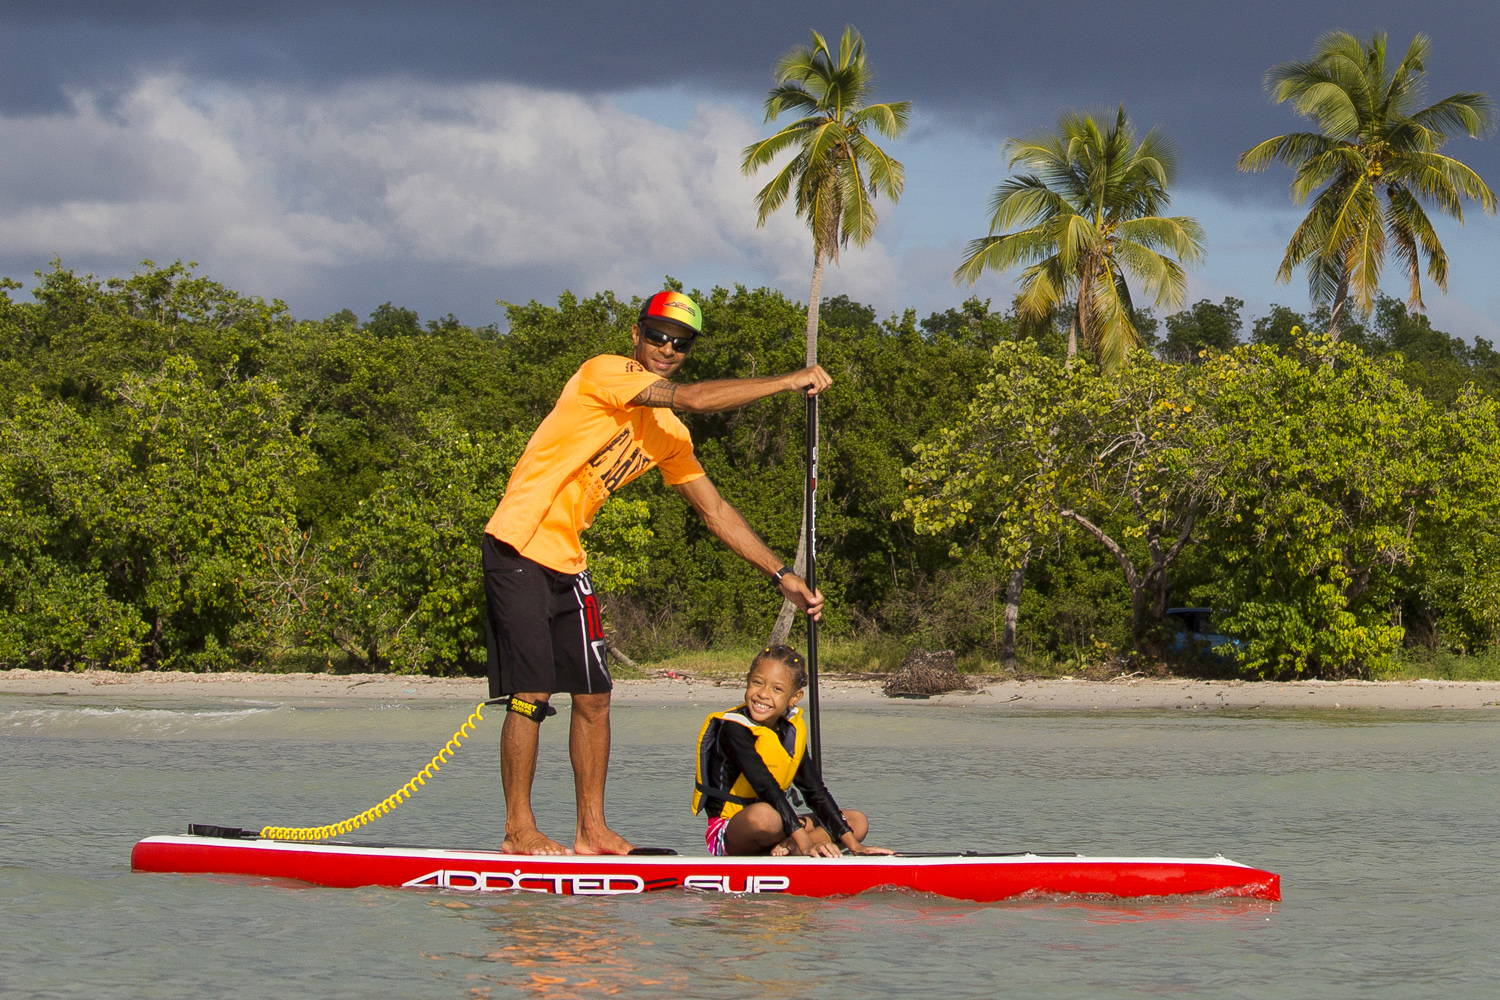 425 pro Air Sup Board: A man paddling with a child